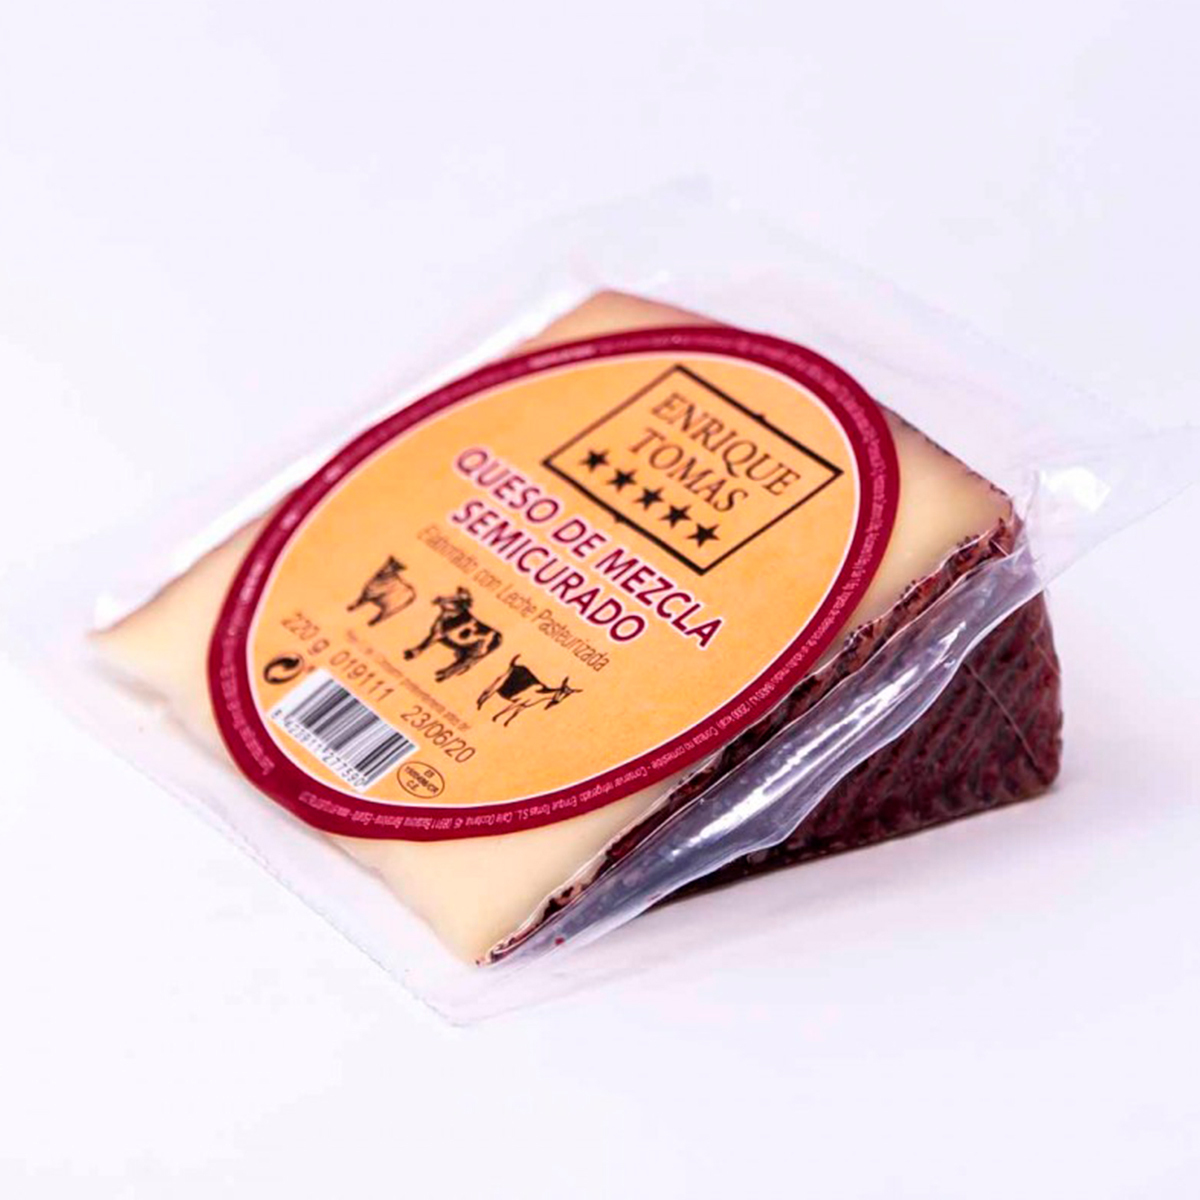 Enrique Tomás semi cured mixed cheese wedge